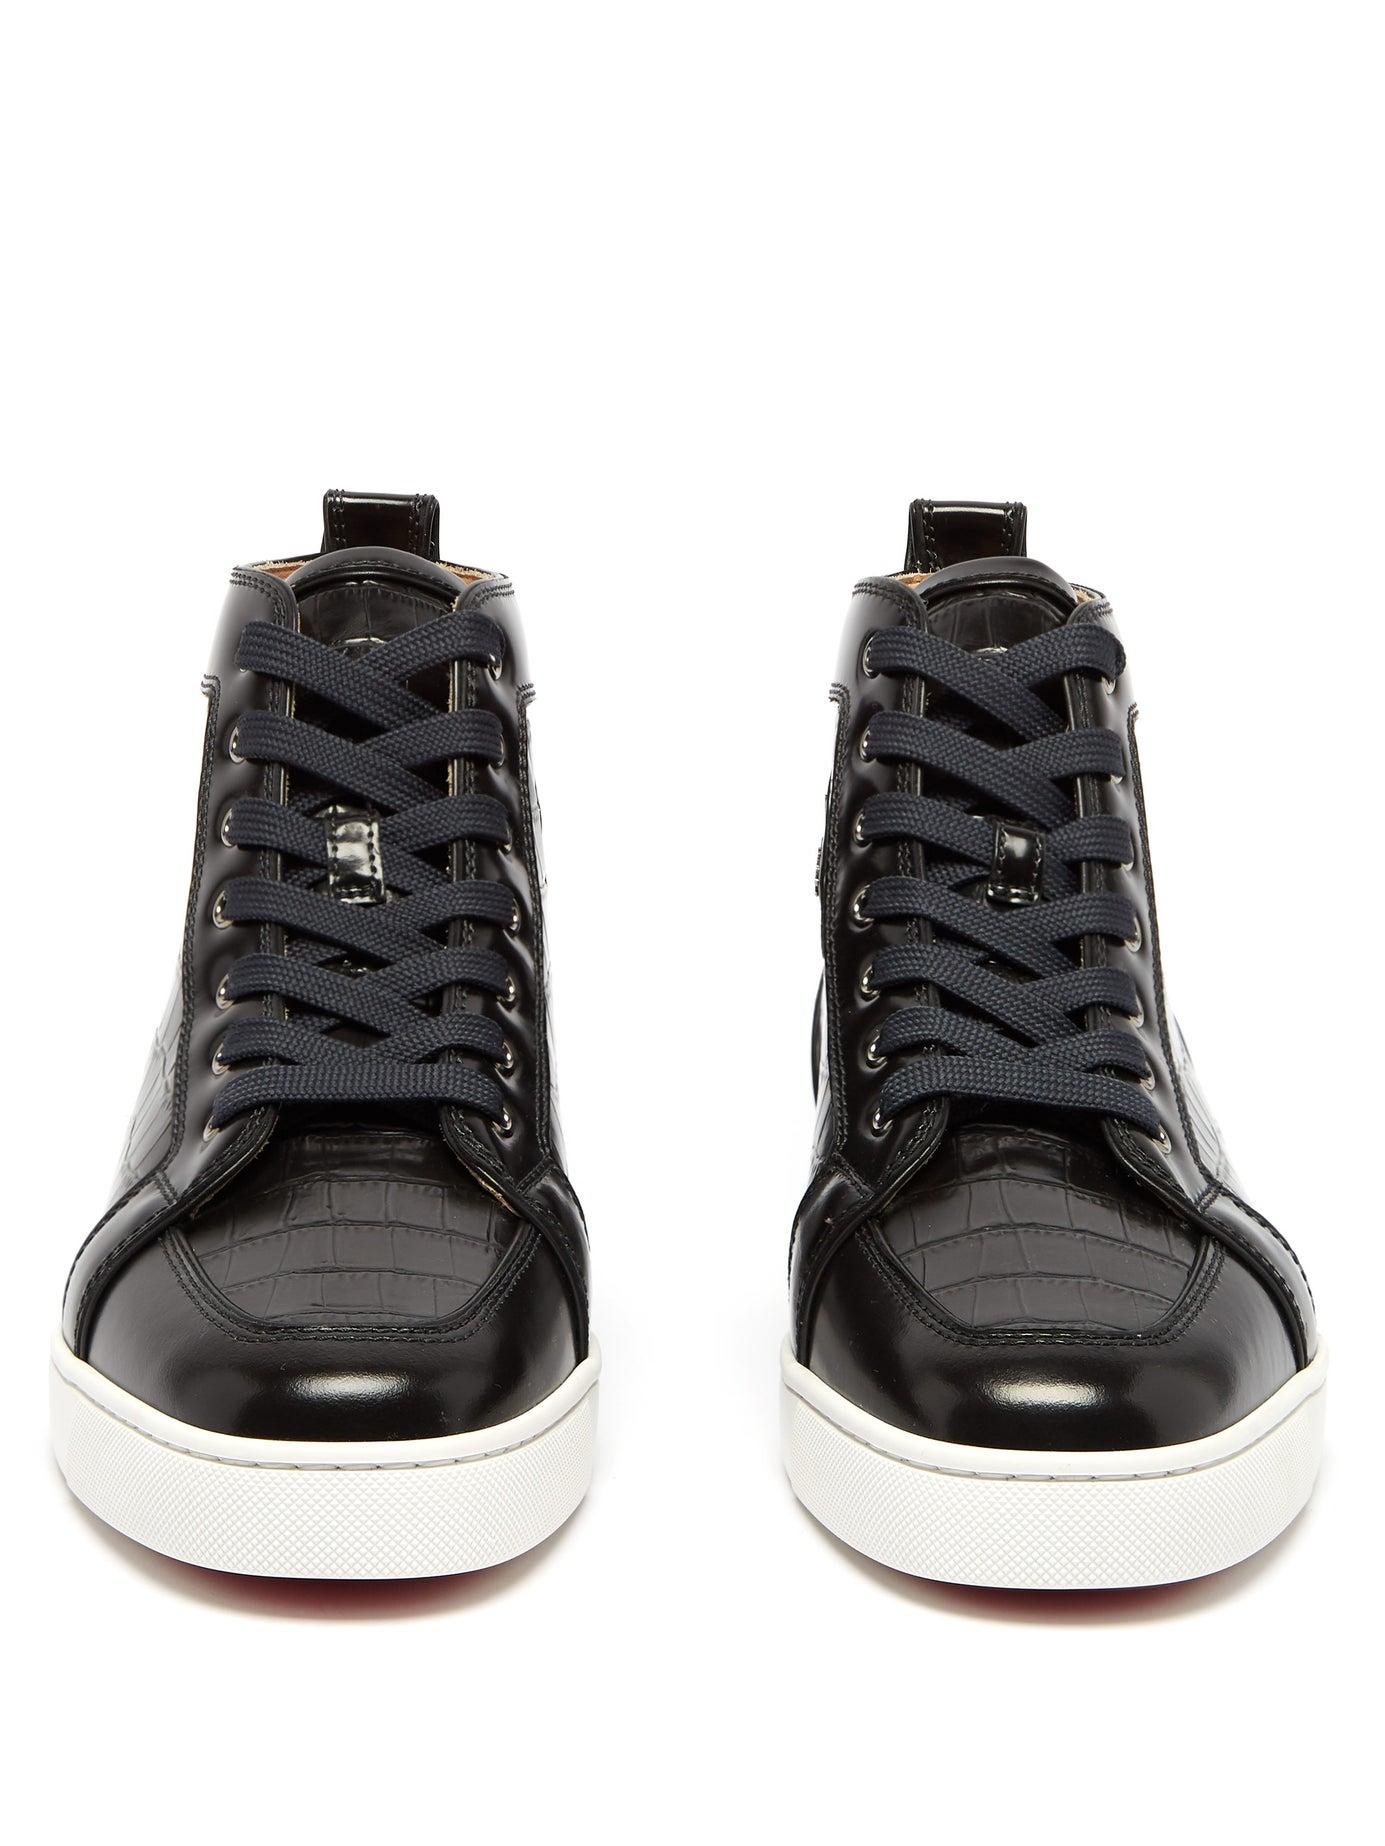 Christian Louboutin Rantus Crocodile-effect High-top Leather Trainers in  Black for Men - Lyst